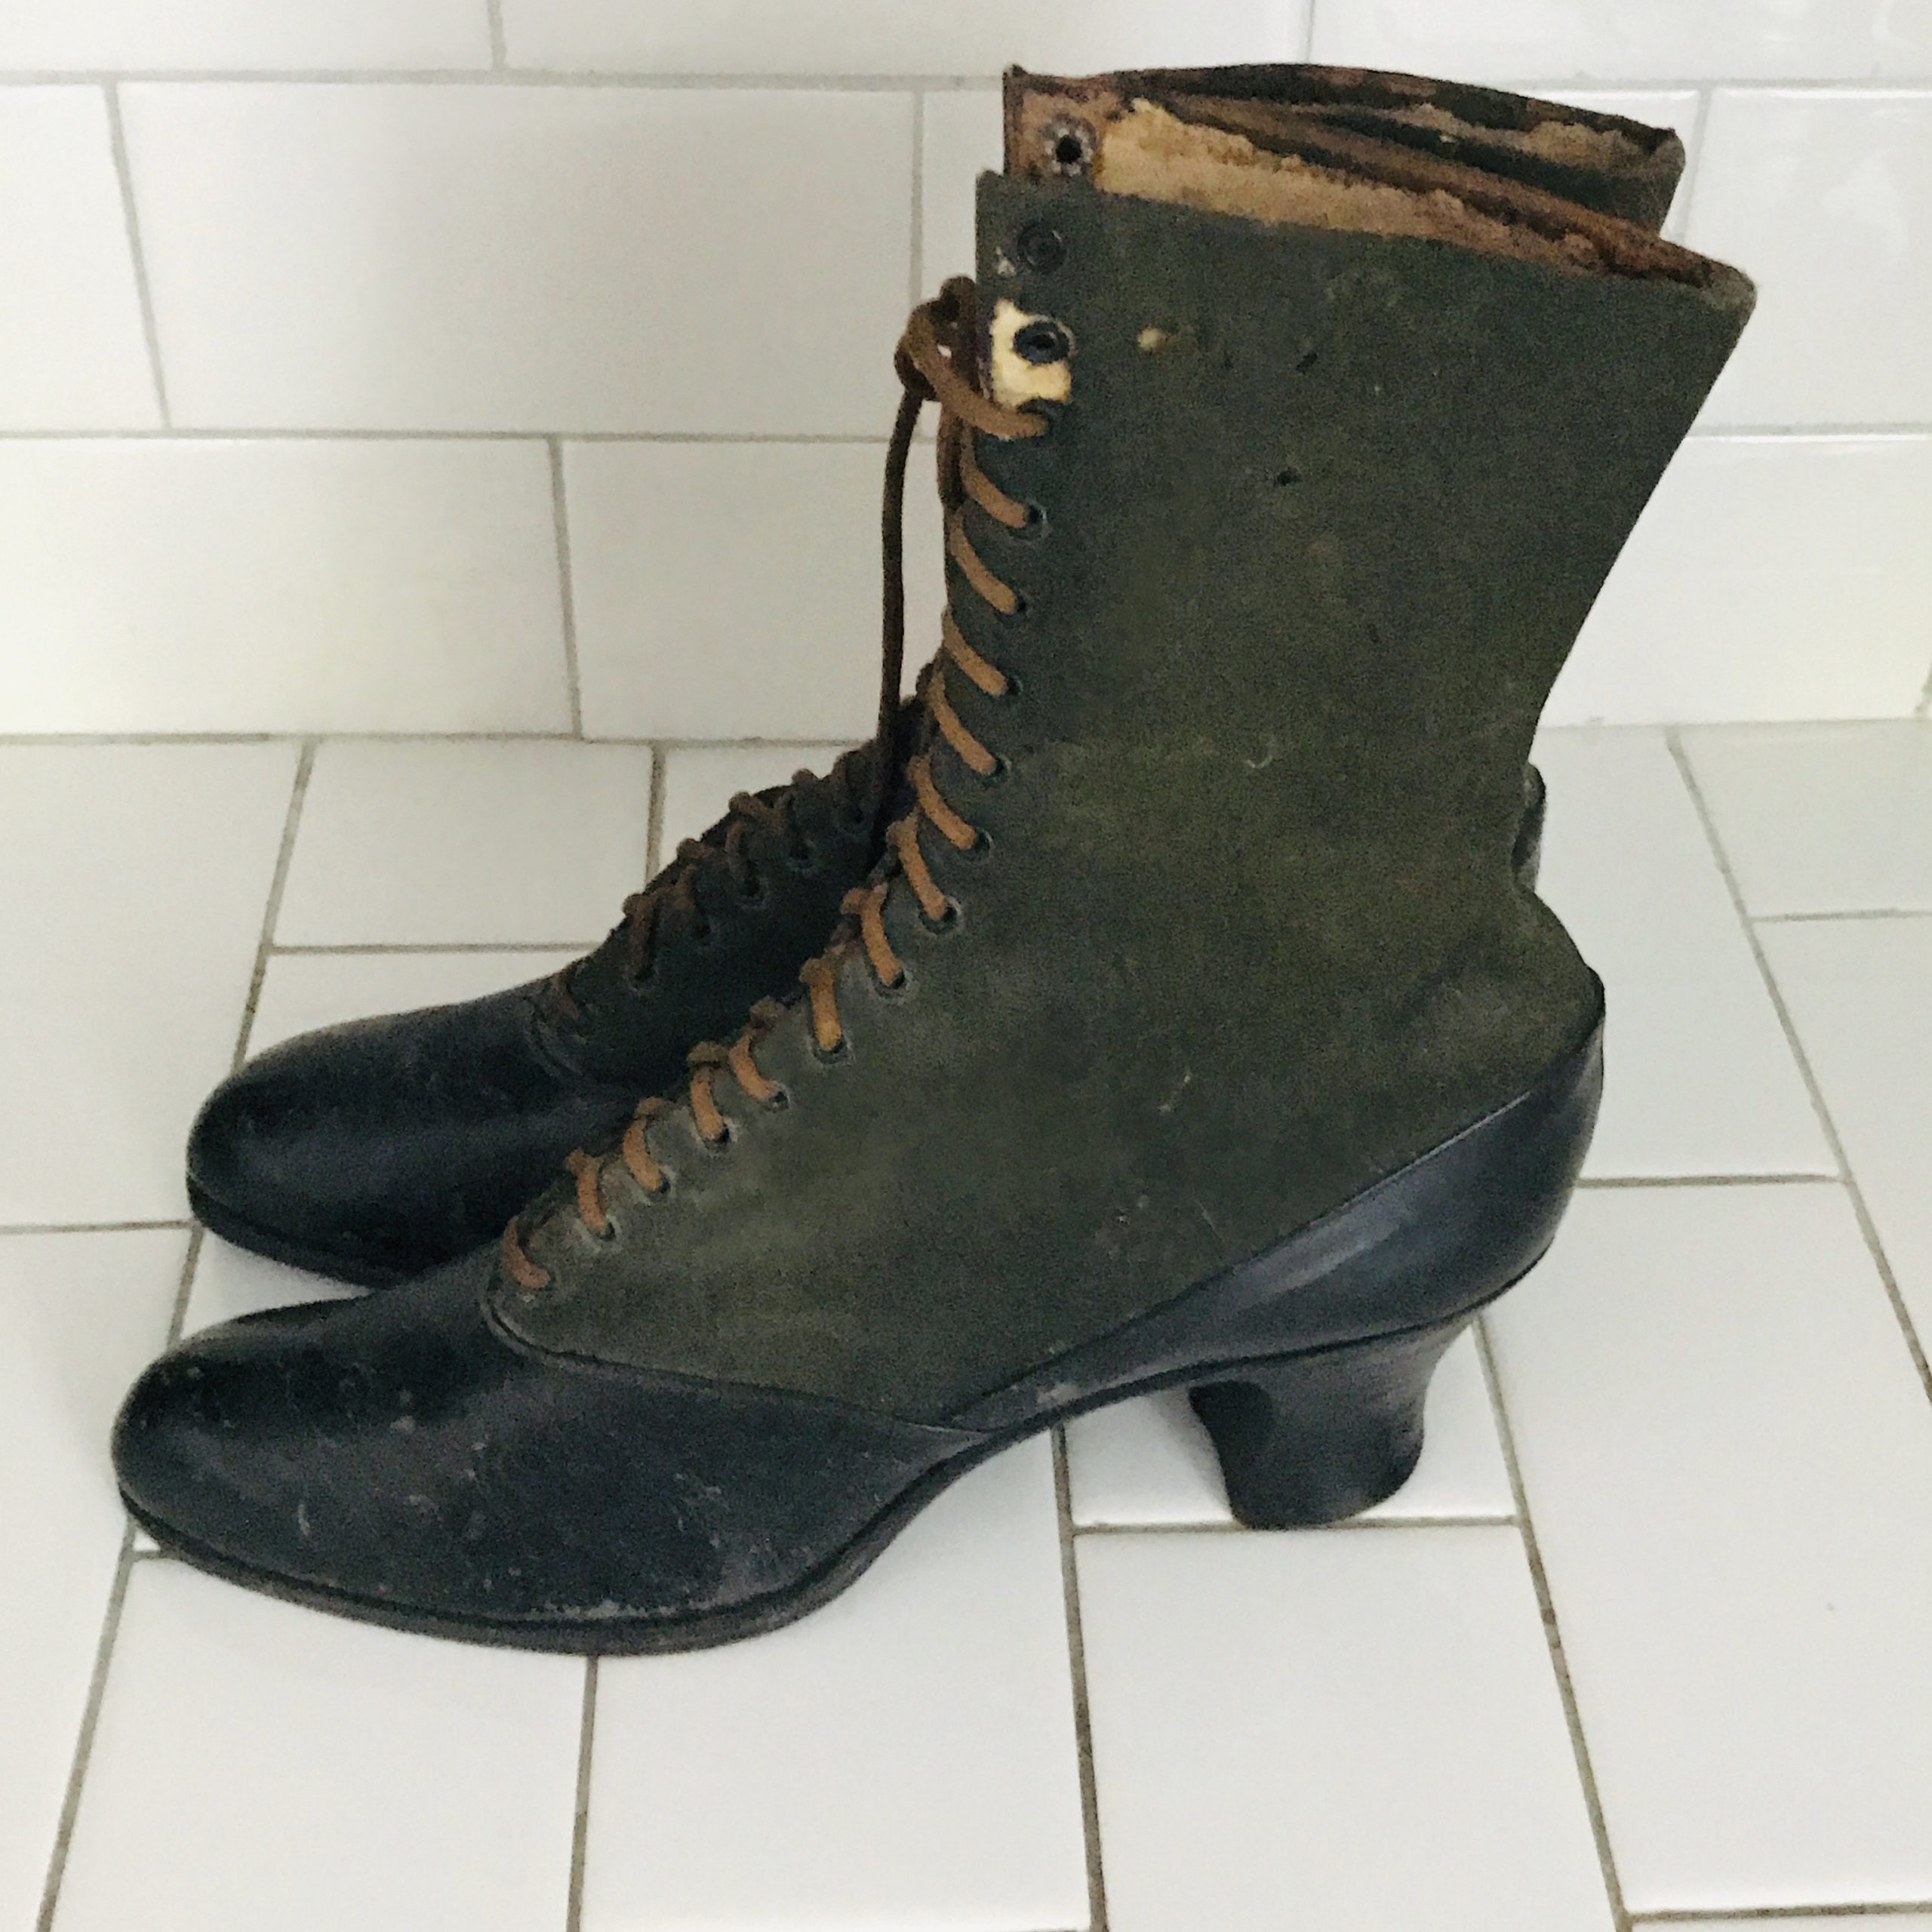 Antique women's boots shoes leather with fabric lace up Museum